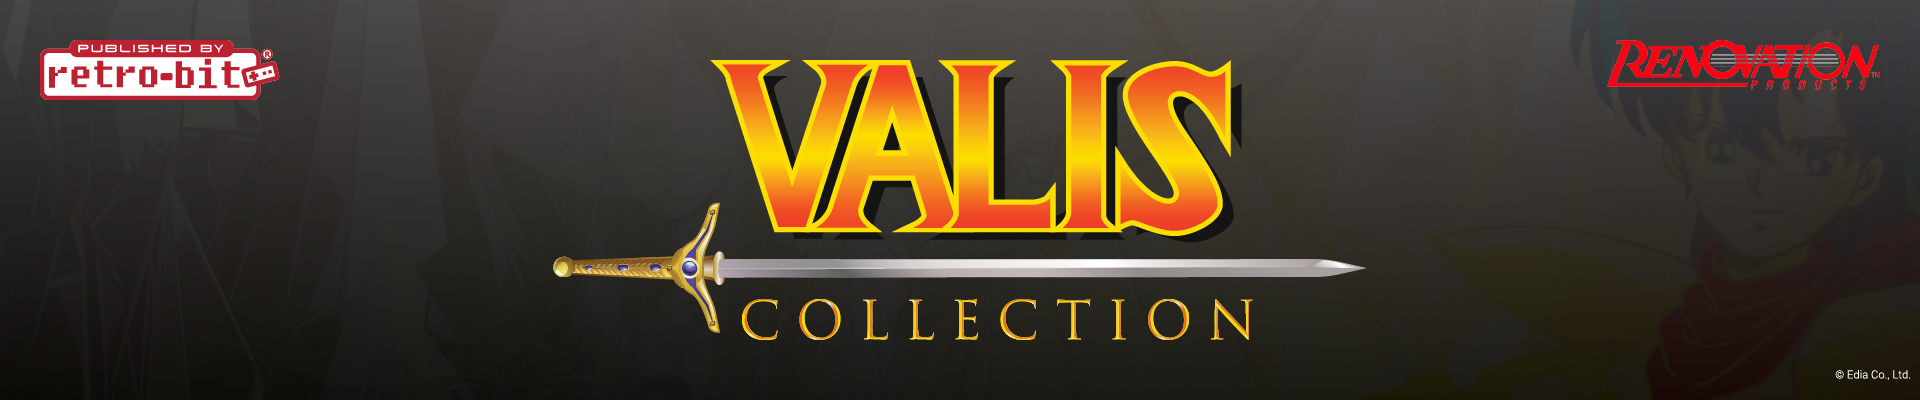 The Valis Collection - Retro-Bit Publishing - Renovation Products